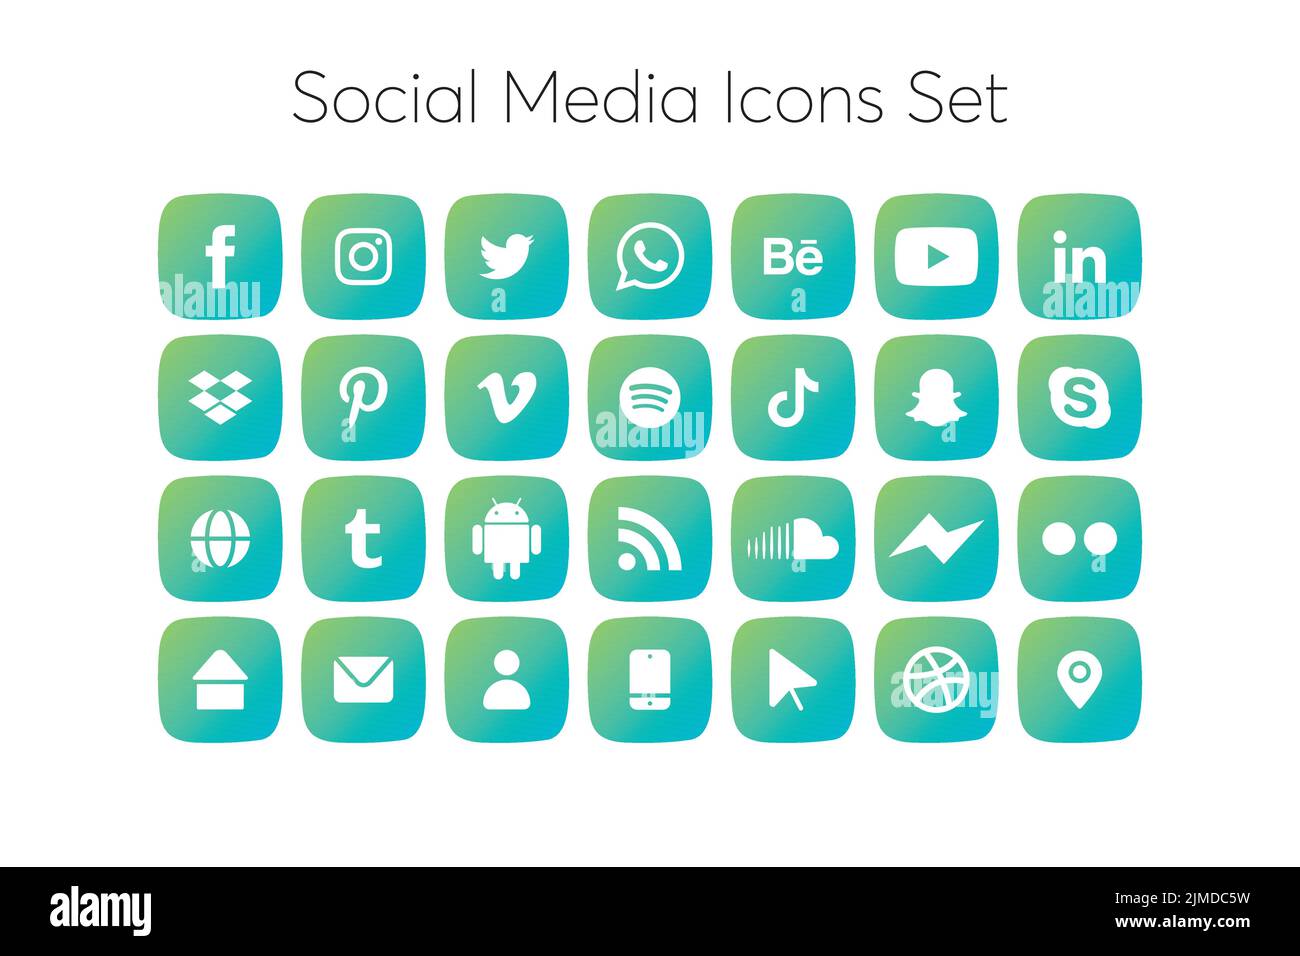 Social media icon sets in rounded corner square button teal green and blue color Stock Vector